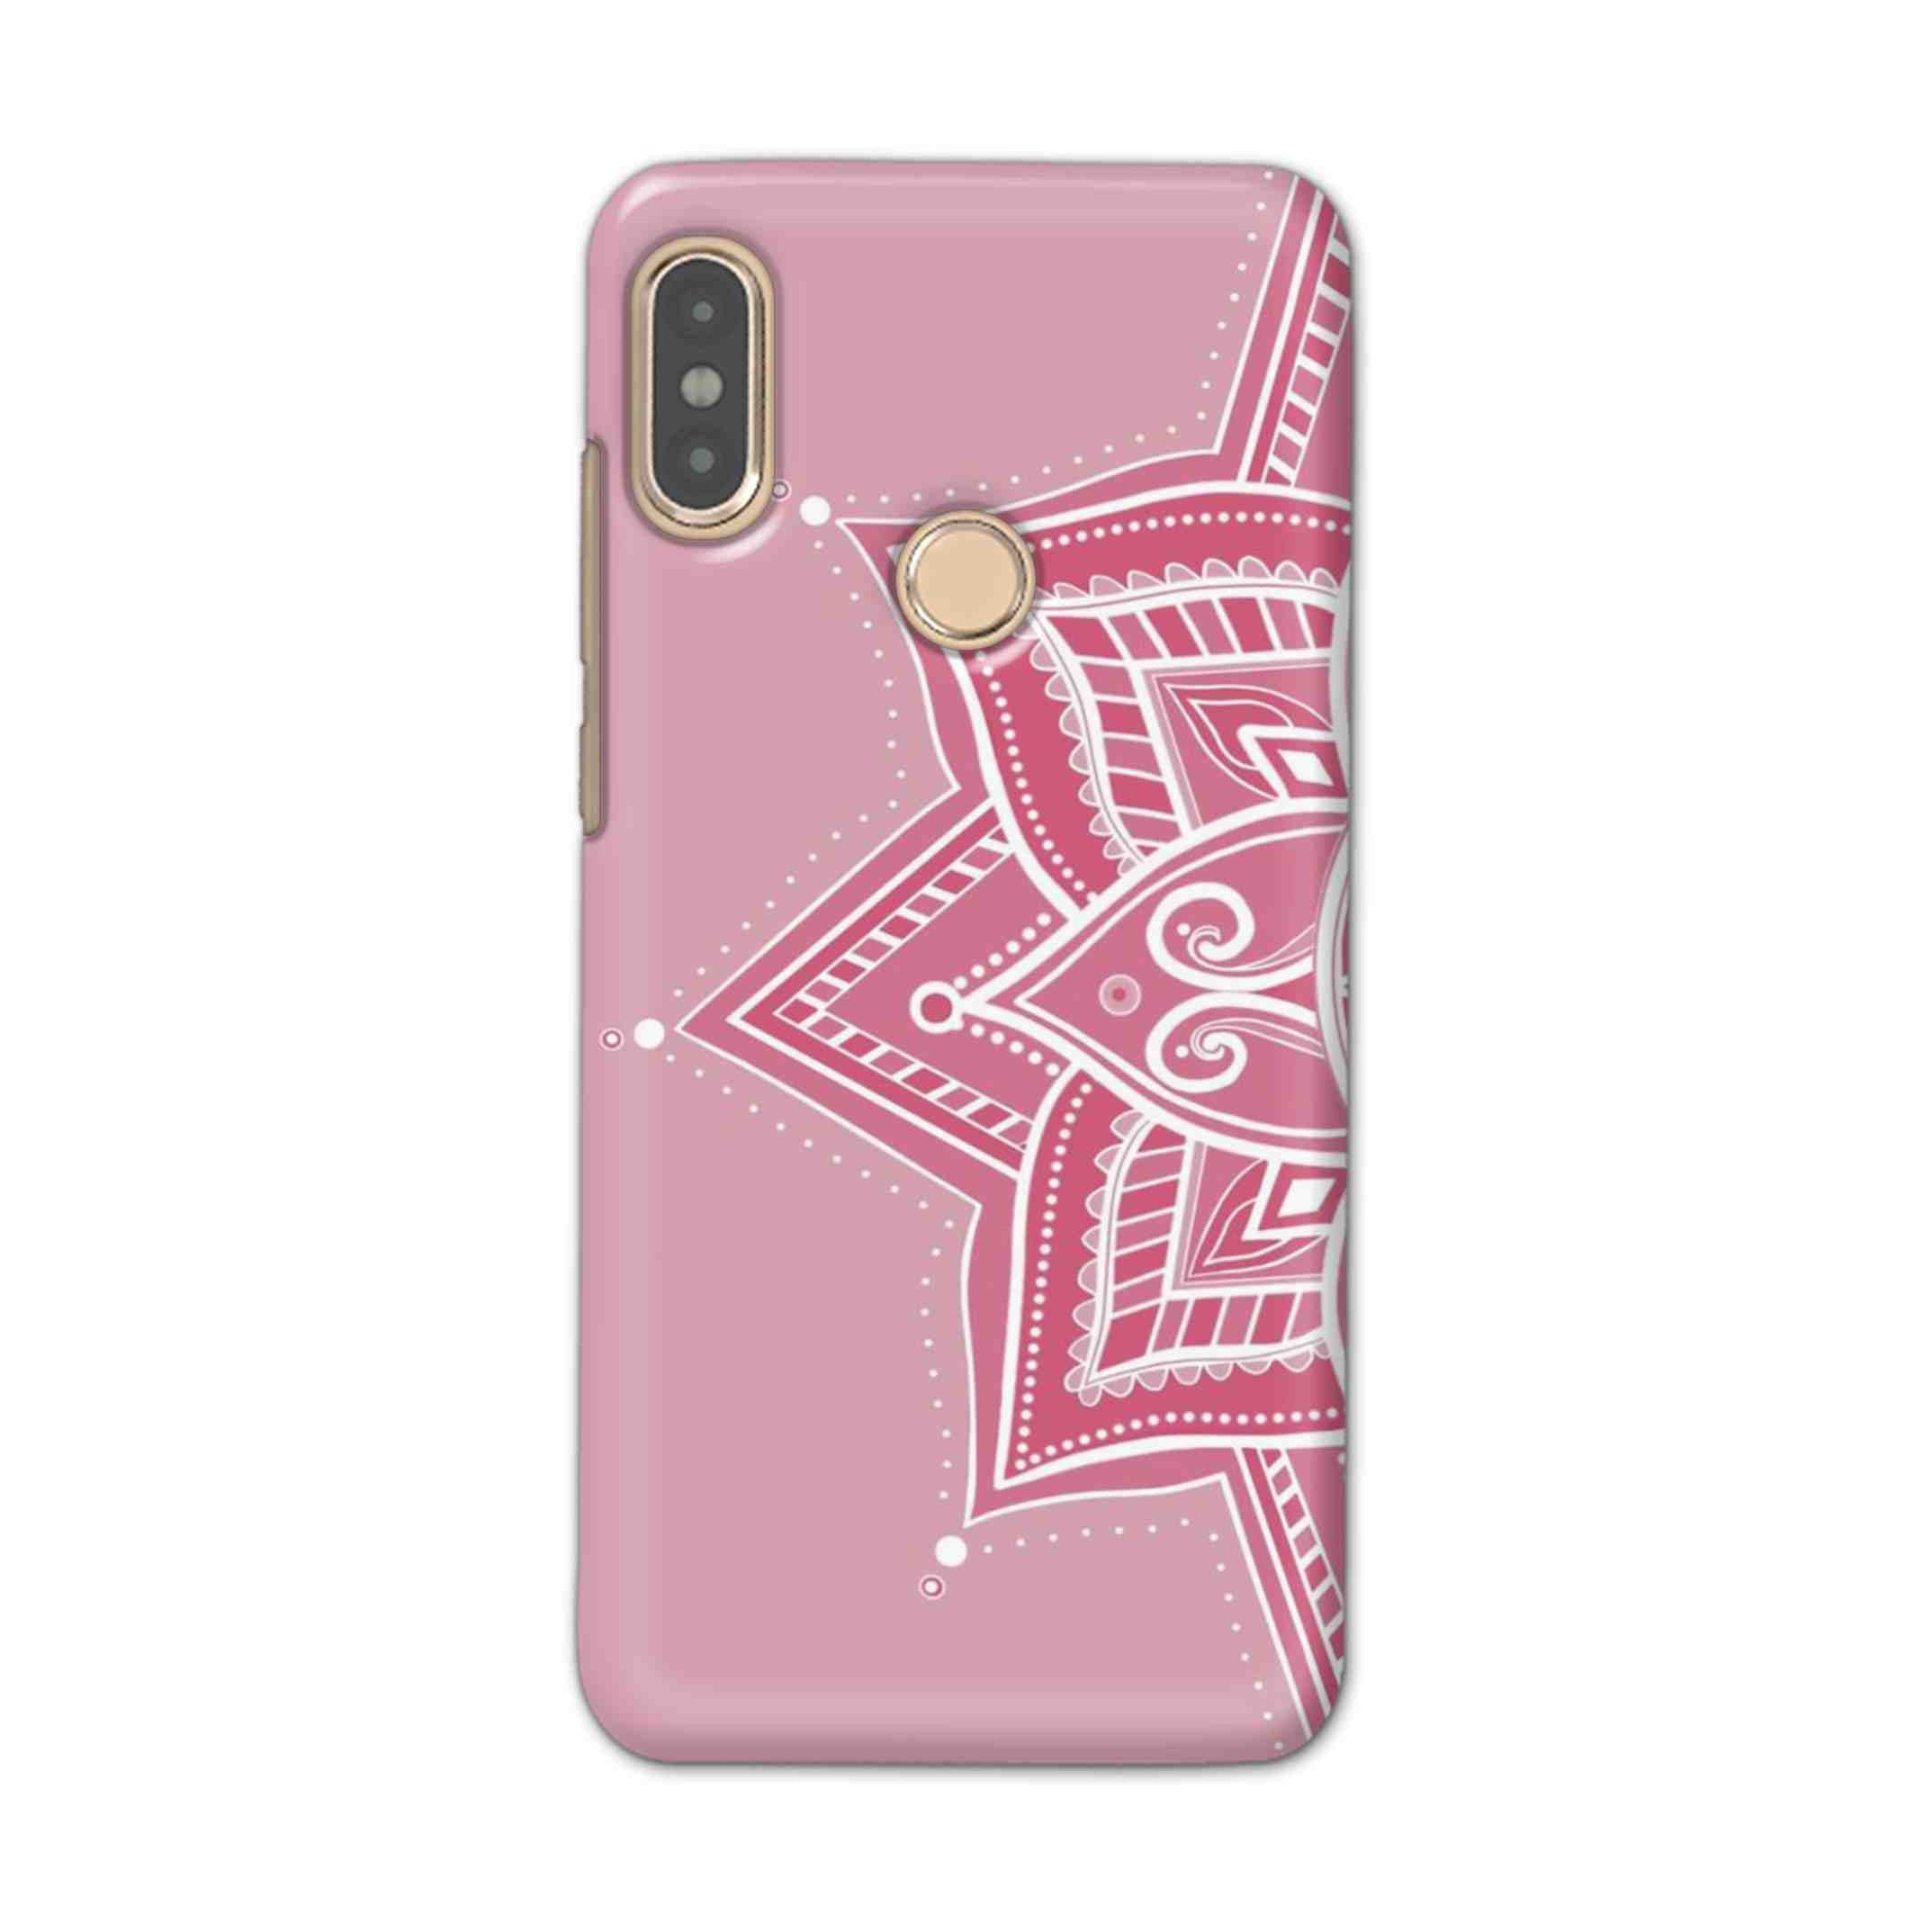 Buy Pink Rangoli Hard Back Mobile Phone Case Cover For Xiaomi Redmi Note 5 Pro Online